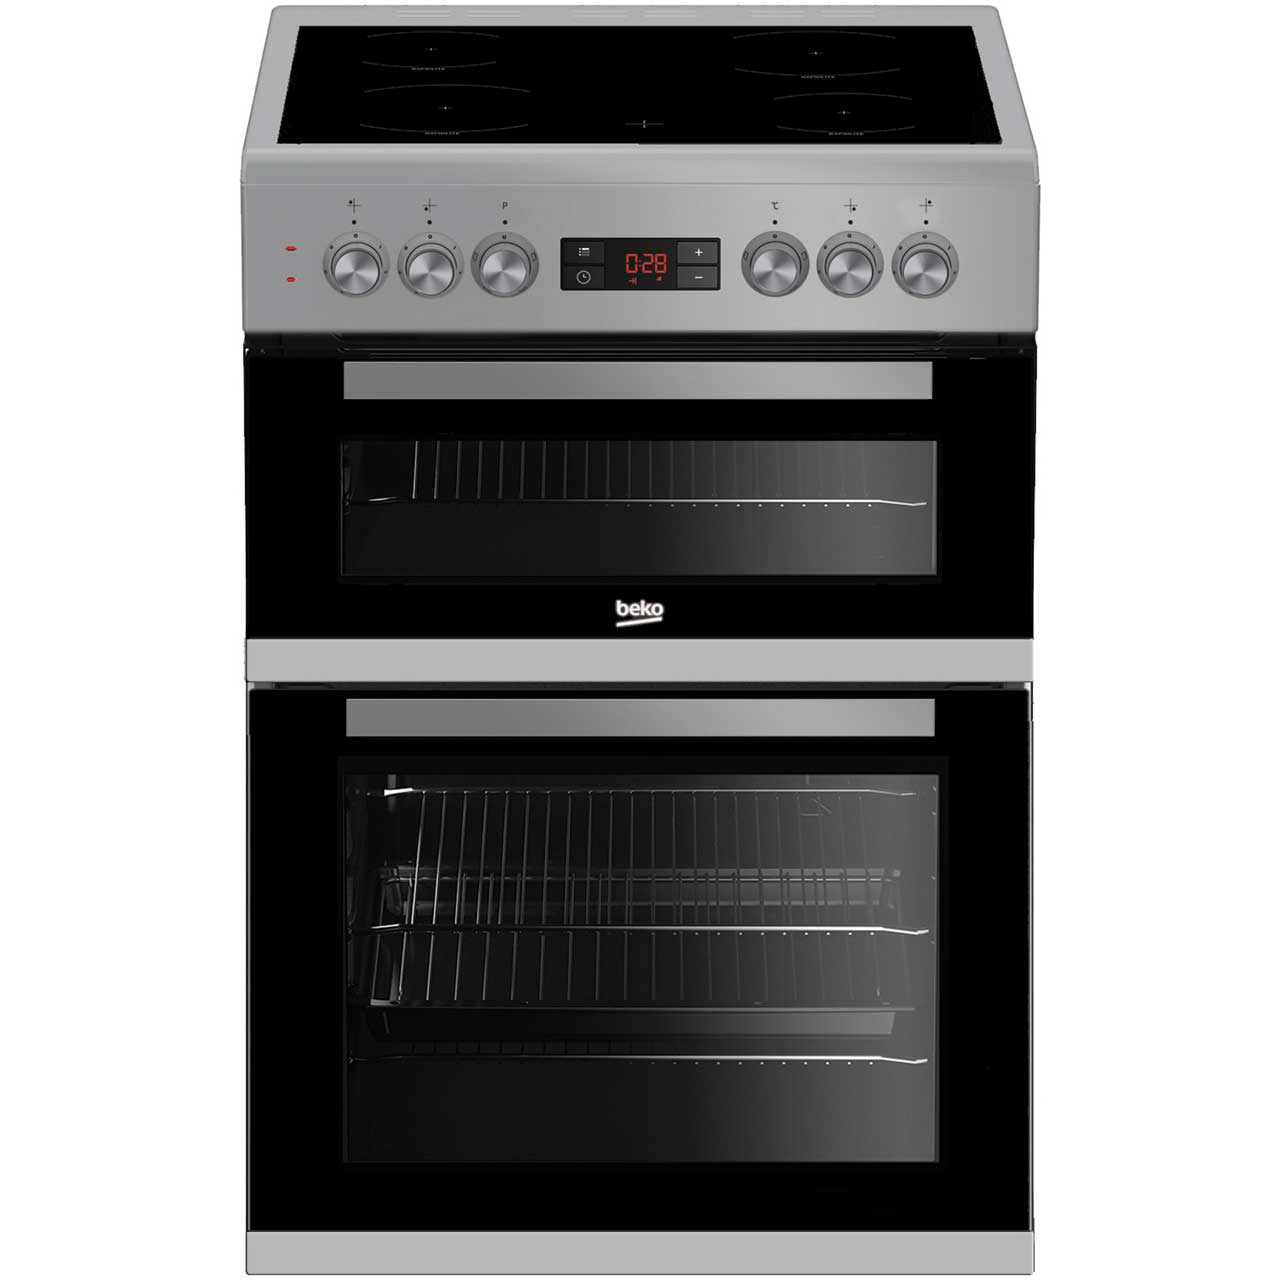 Beko 60cm electric cooker - Pay Weekly World